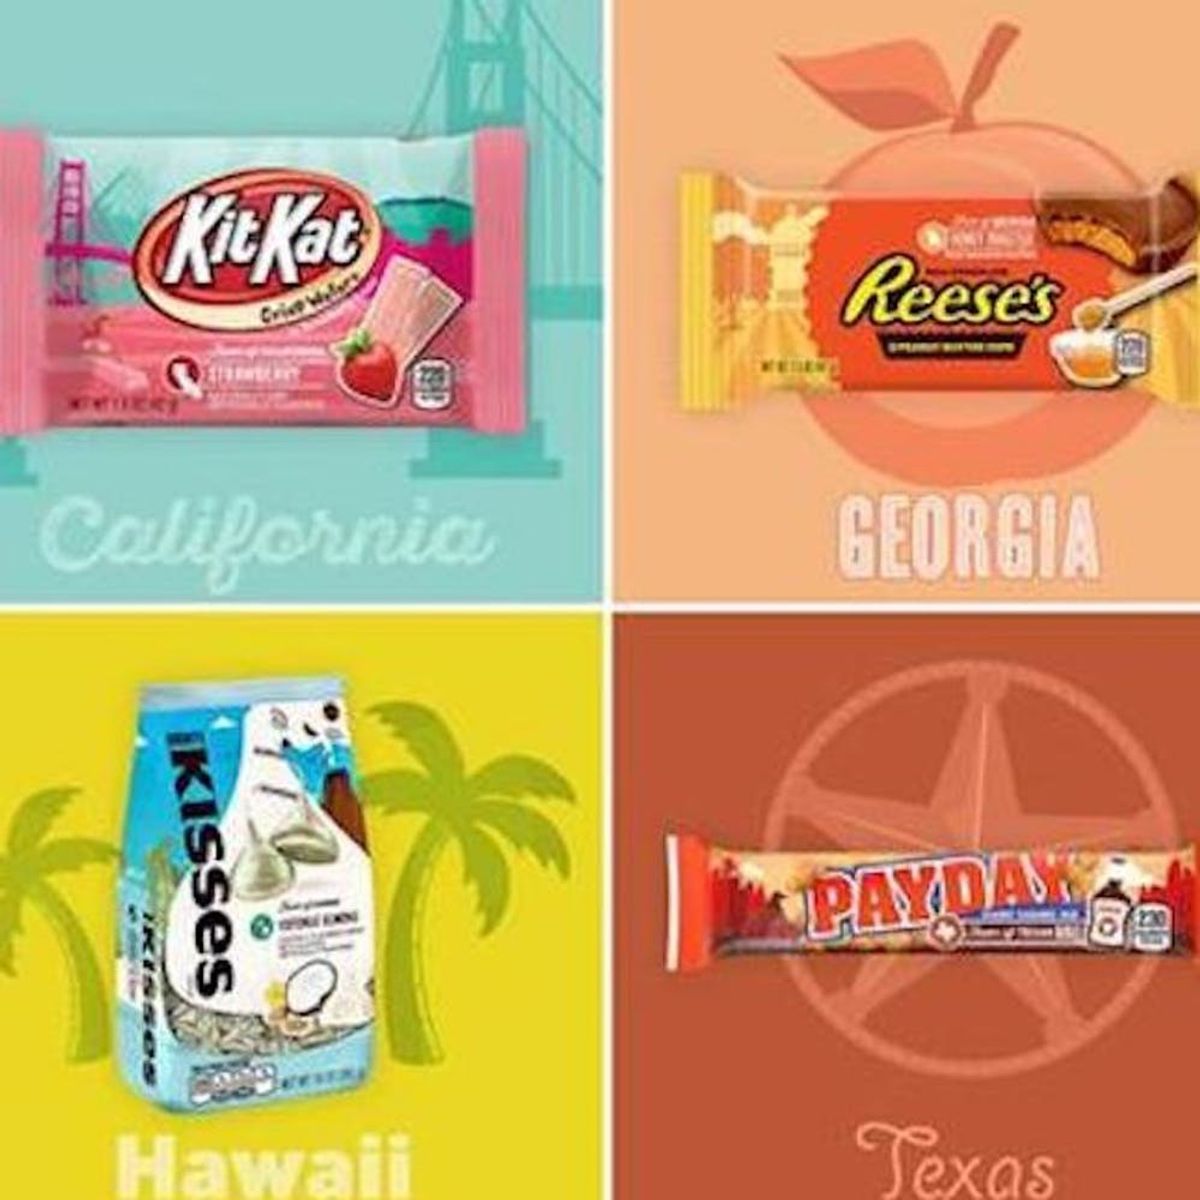 Hershey’s Has Launched 7 New Wild Candy Flavors Inspired by Select States